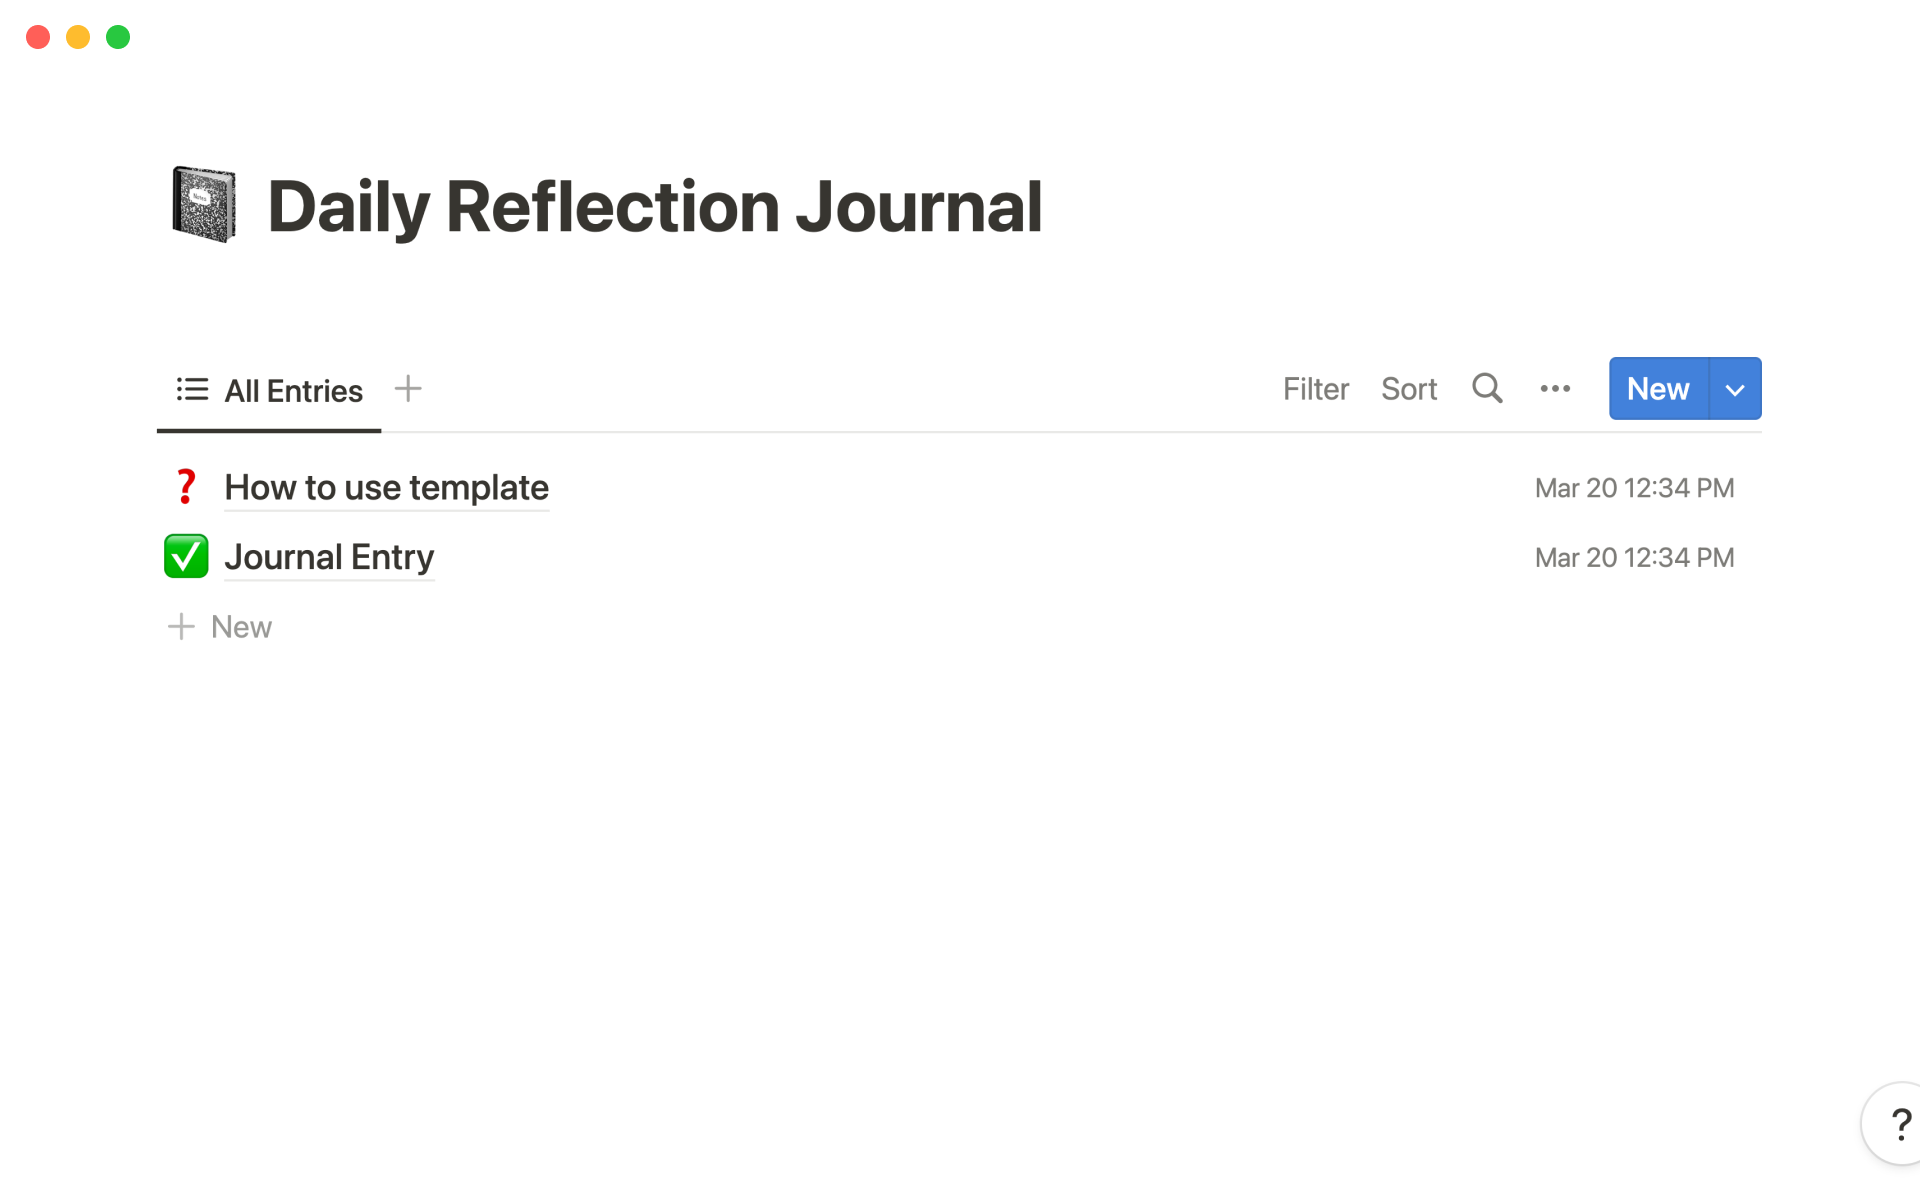 Daily reflection journal template for Notion made to help you reflect and journal digitally.